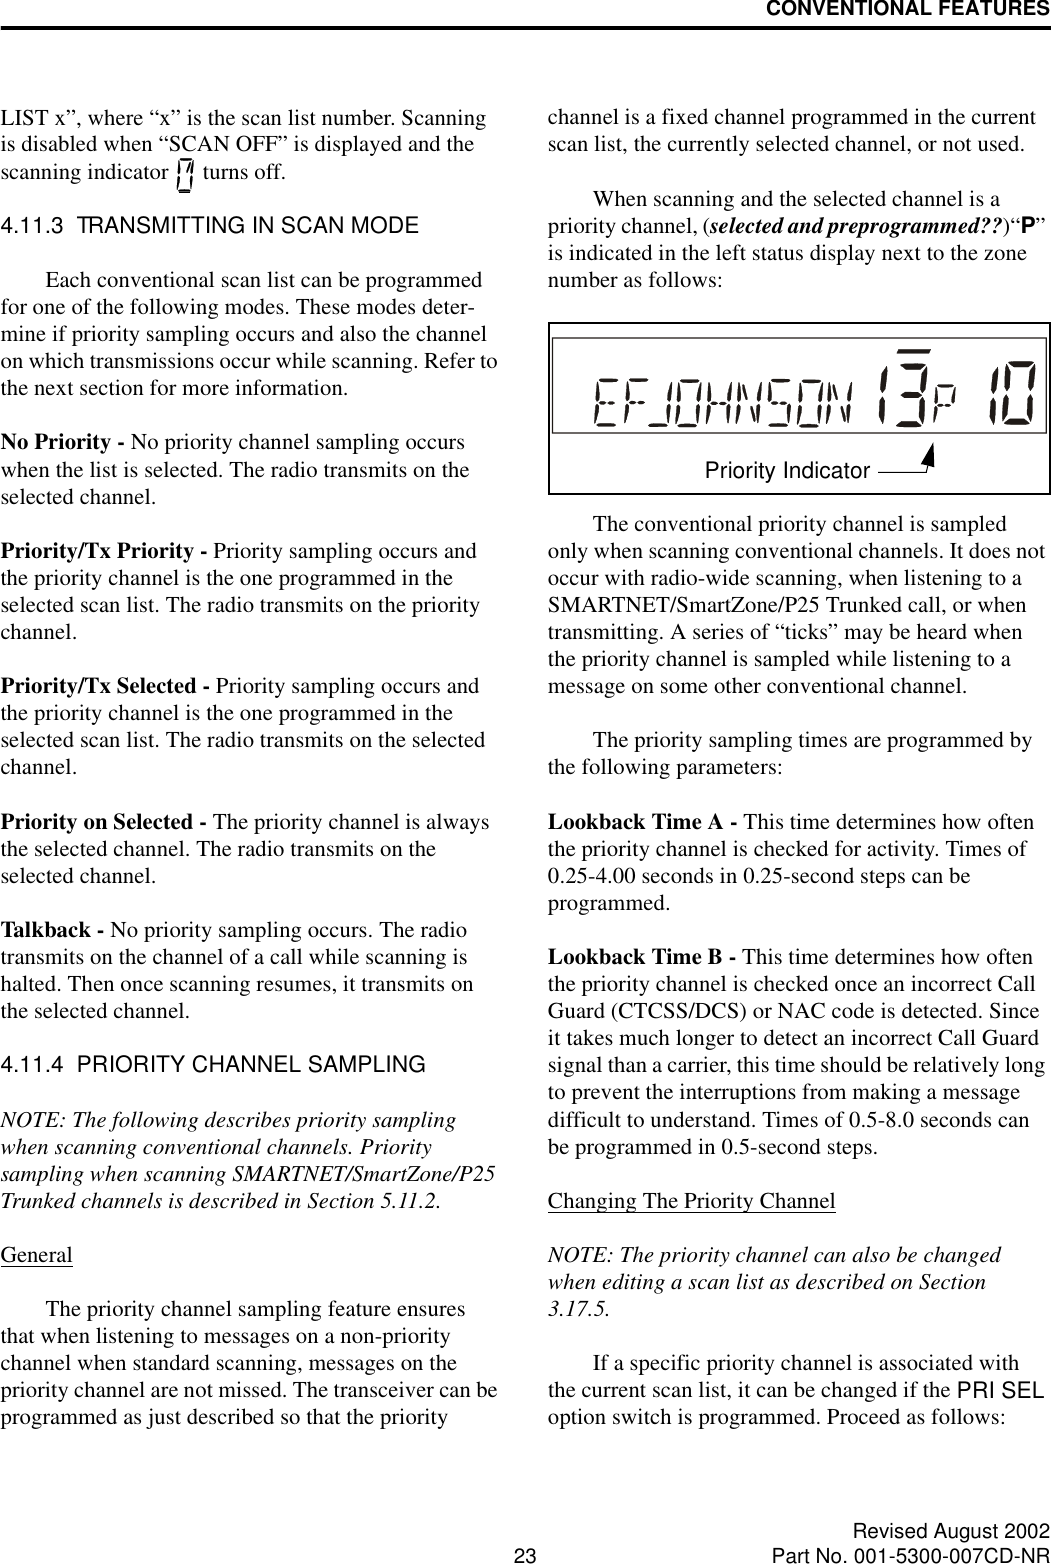 CONVENTIONAL FEATURES23 Revised August 2002Part No. 001-5300-007CD-NRLIST x”, where “x” is the scan list number. Scanning is disabled when “SCAN OFF” is displayed and the scanning indicator   turns off.4.11.3  TRANSMITTING IN SCAN MODEEach conventional scan list can be programmed for one of the following modes. These modes deter-mine if priority sampling occurs and also the channel on which transmissions occur while scanning. Refer to the next section for more information.No Priority - No priority channel sampling occurs when the list is selected. The radio transmits on the selected channel.Priority/Tx Priority - Priority sampling occurs and the priority channel is the one programmed in the selected scan list. The radio transmits on the priority channel.Priority/Tx Selected - Priority sampling occurs and the priority channel is the one programmed in the selected scan list. The radio transmits on the selected channel.Priority on Selected - The priority channel is always the selected channel. The radio transmits on the selected channel. Talkback - No priority sampling occurs. The radio transmits on the channel of a call while scanning is halted. Then once scanning resumes, it transmits on the selected channel.4.11.4  PRIORITY CHANNEL SAMPLINGNOTE: The following describes priority sampling when scanning conventional channels. Priority sampling when scanning SMARTNET/SmartZone/P25 Trunked channels is described in Section 5.11.2.GeneralThe priority channel sampling feature ensures that when listening to messages on a non-priority channel when standard scanning, messages on the priority channel are not missed. The transceiver can be programmed as just described so that the priority channel is a fixed channel programmed in the current scan list, the currently selected channel, or not used. When scanning and the selected channel is a priority channel, (selected and preprogrammed??)“P” is indicated in the left status display next to the zone number as follows:The conventional priority channel is sampled only when scanning conventional channels. It does not occur with radio-wide scanning, when listening to a SMARTNET/SmartZone/P25 Trunked call, or when transmitting. A series of “ticks” may be heard when the priority channel is sampled while listening to a message on some other conventional channel. The priority sampling times are programmed by the following parameters:Lookback Time A - This time determines how often the priority channel is checked for activity. Times of 0.25-4.00 seconds in 0.25-second steps can be programmed.Lookback Time B - This time determines how often the priority channel is checked once an incorrect Call Guard (CTCSS/DCS) or NAC code is detected. Since it takes much longer to detect an incorrect Call Guard signal than a carrier, this time should be relatively long to prevent the interruptions from making a message difficult to understand. Times of 0.5-8.0 seconds can be programmed in 0.5-second steps.Changing The Priority ChannelNOTE: The priority channel can also be changed when editing a scan list as described on Section 3.17.5.If a specific priority channel is associated with the current scan list, it can be changed if the PRI SEL option switch is programmed. Proceed as follows:Priority Indicator